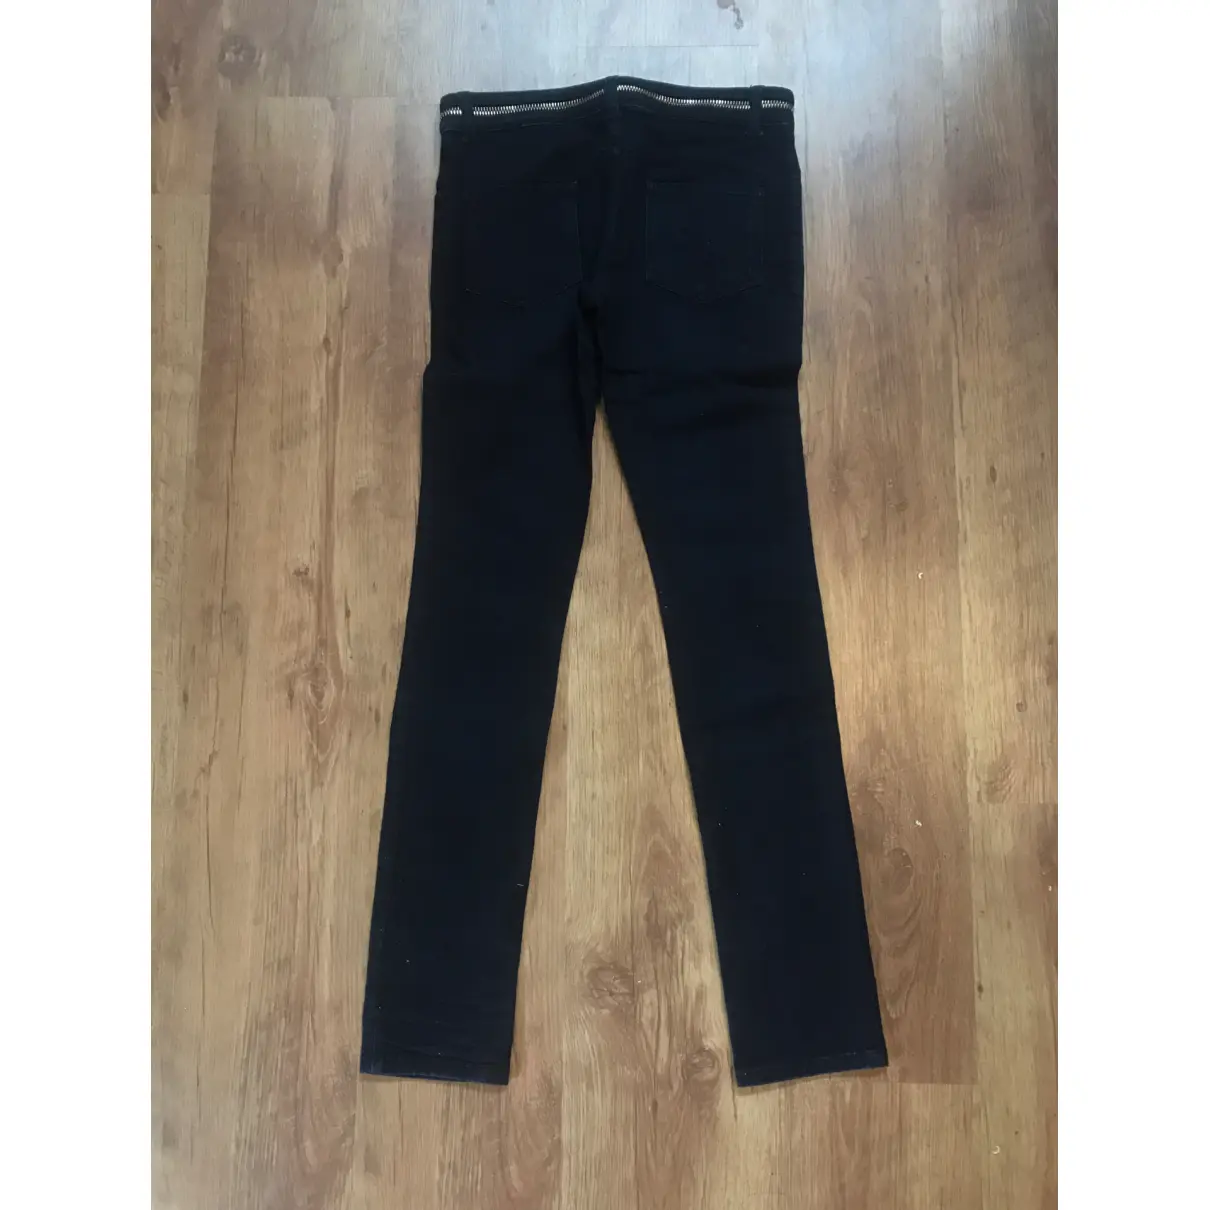 Buy Givenchy Slim jeans online